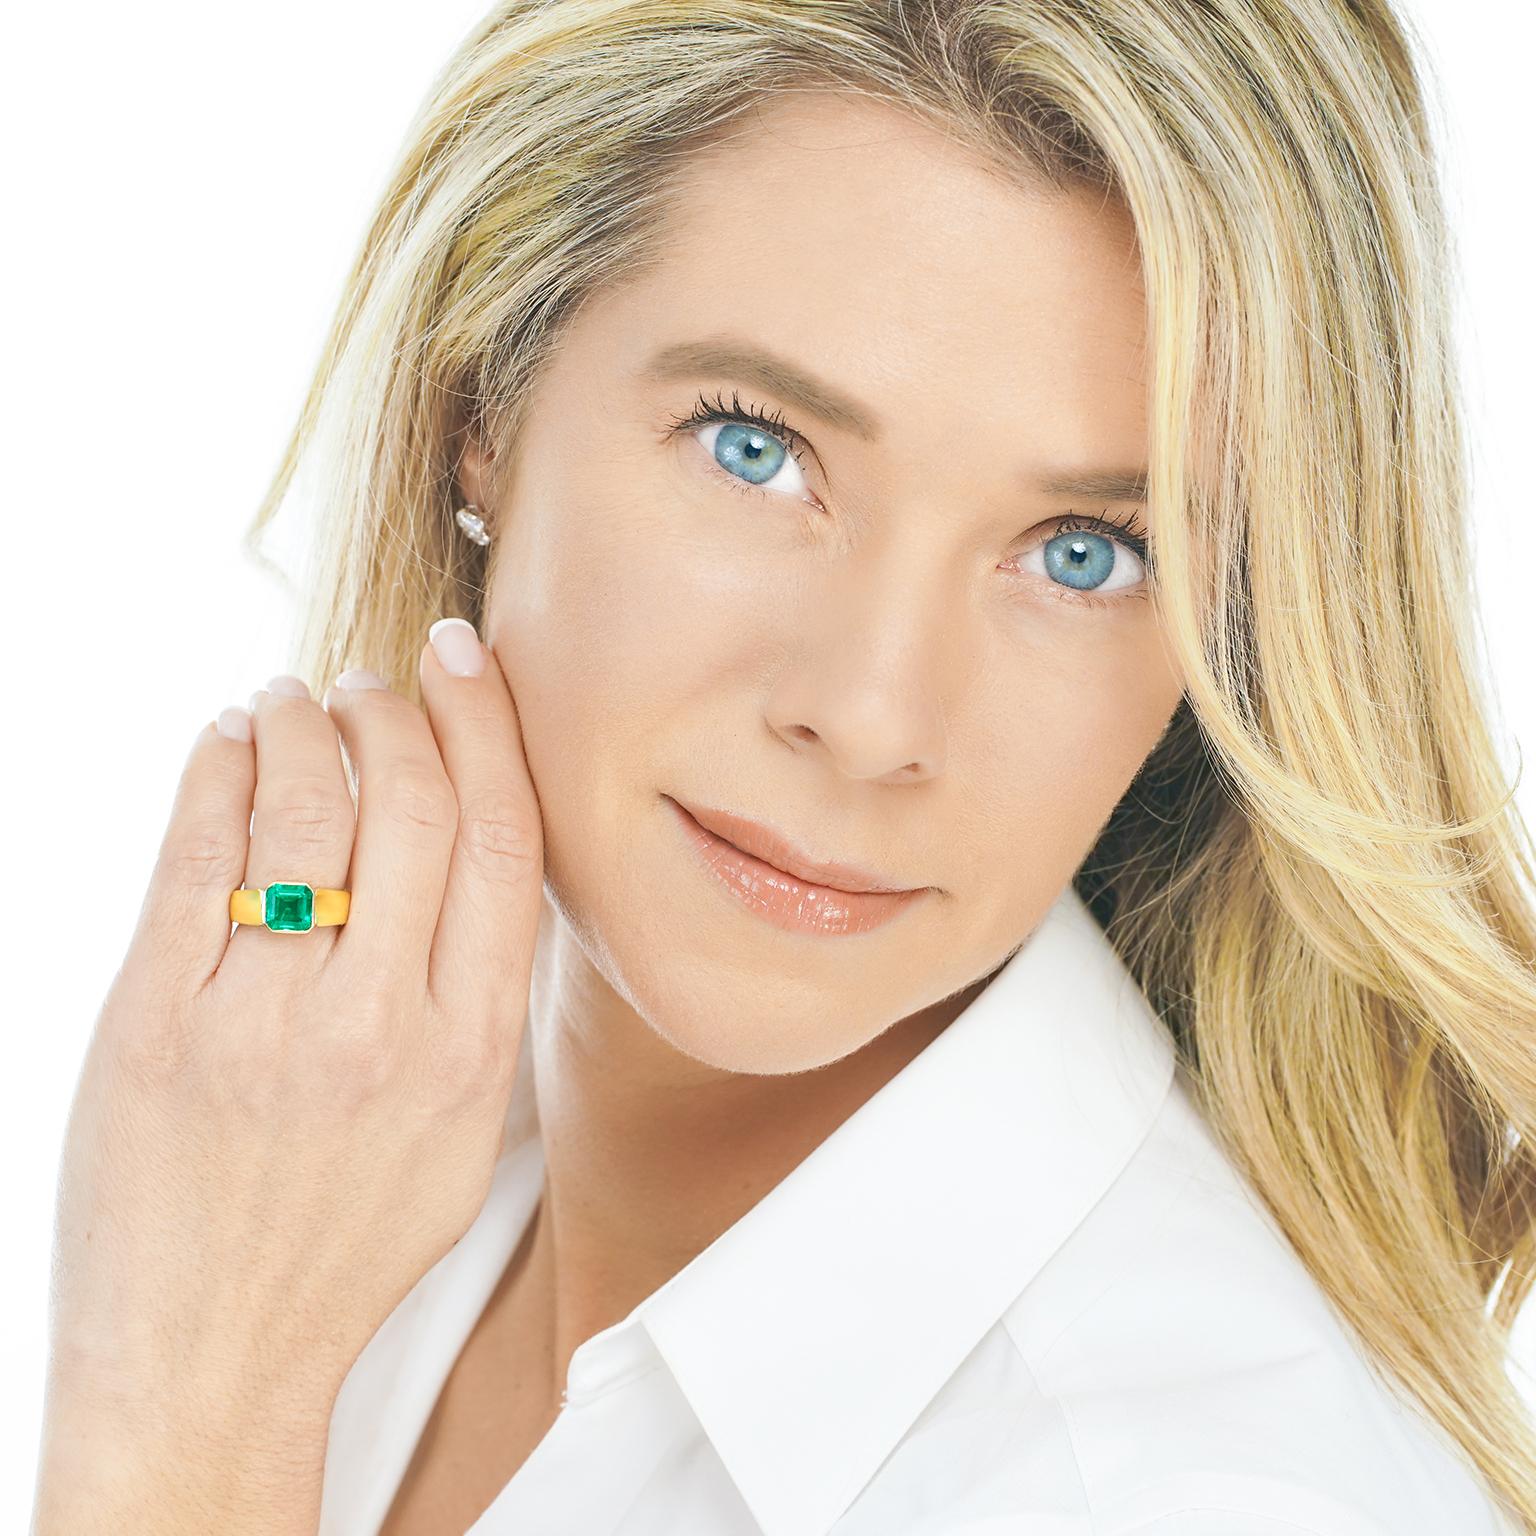 Circa 1960s, 18k, American.   The 3.0 carat emerald in this fabulous sixties ring has gorgeous color and lively passage of light. Its postmodern design is perfect for today's understated off-hand chic. Meticulously made in 18k yellow gold, it is in